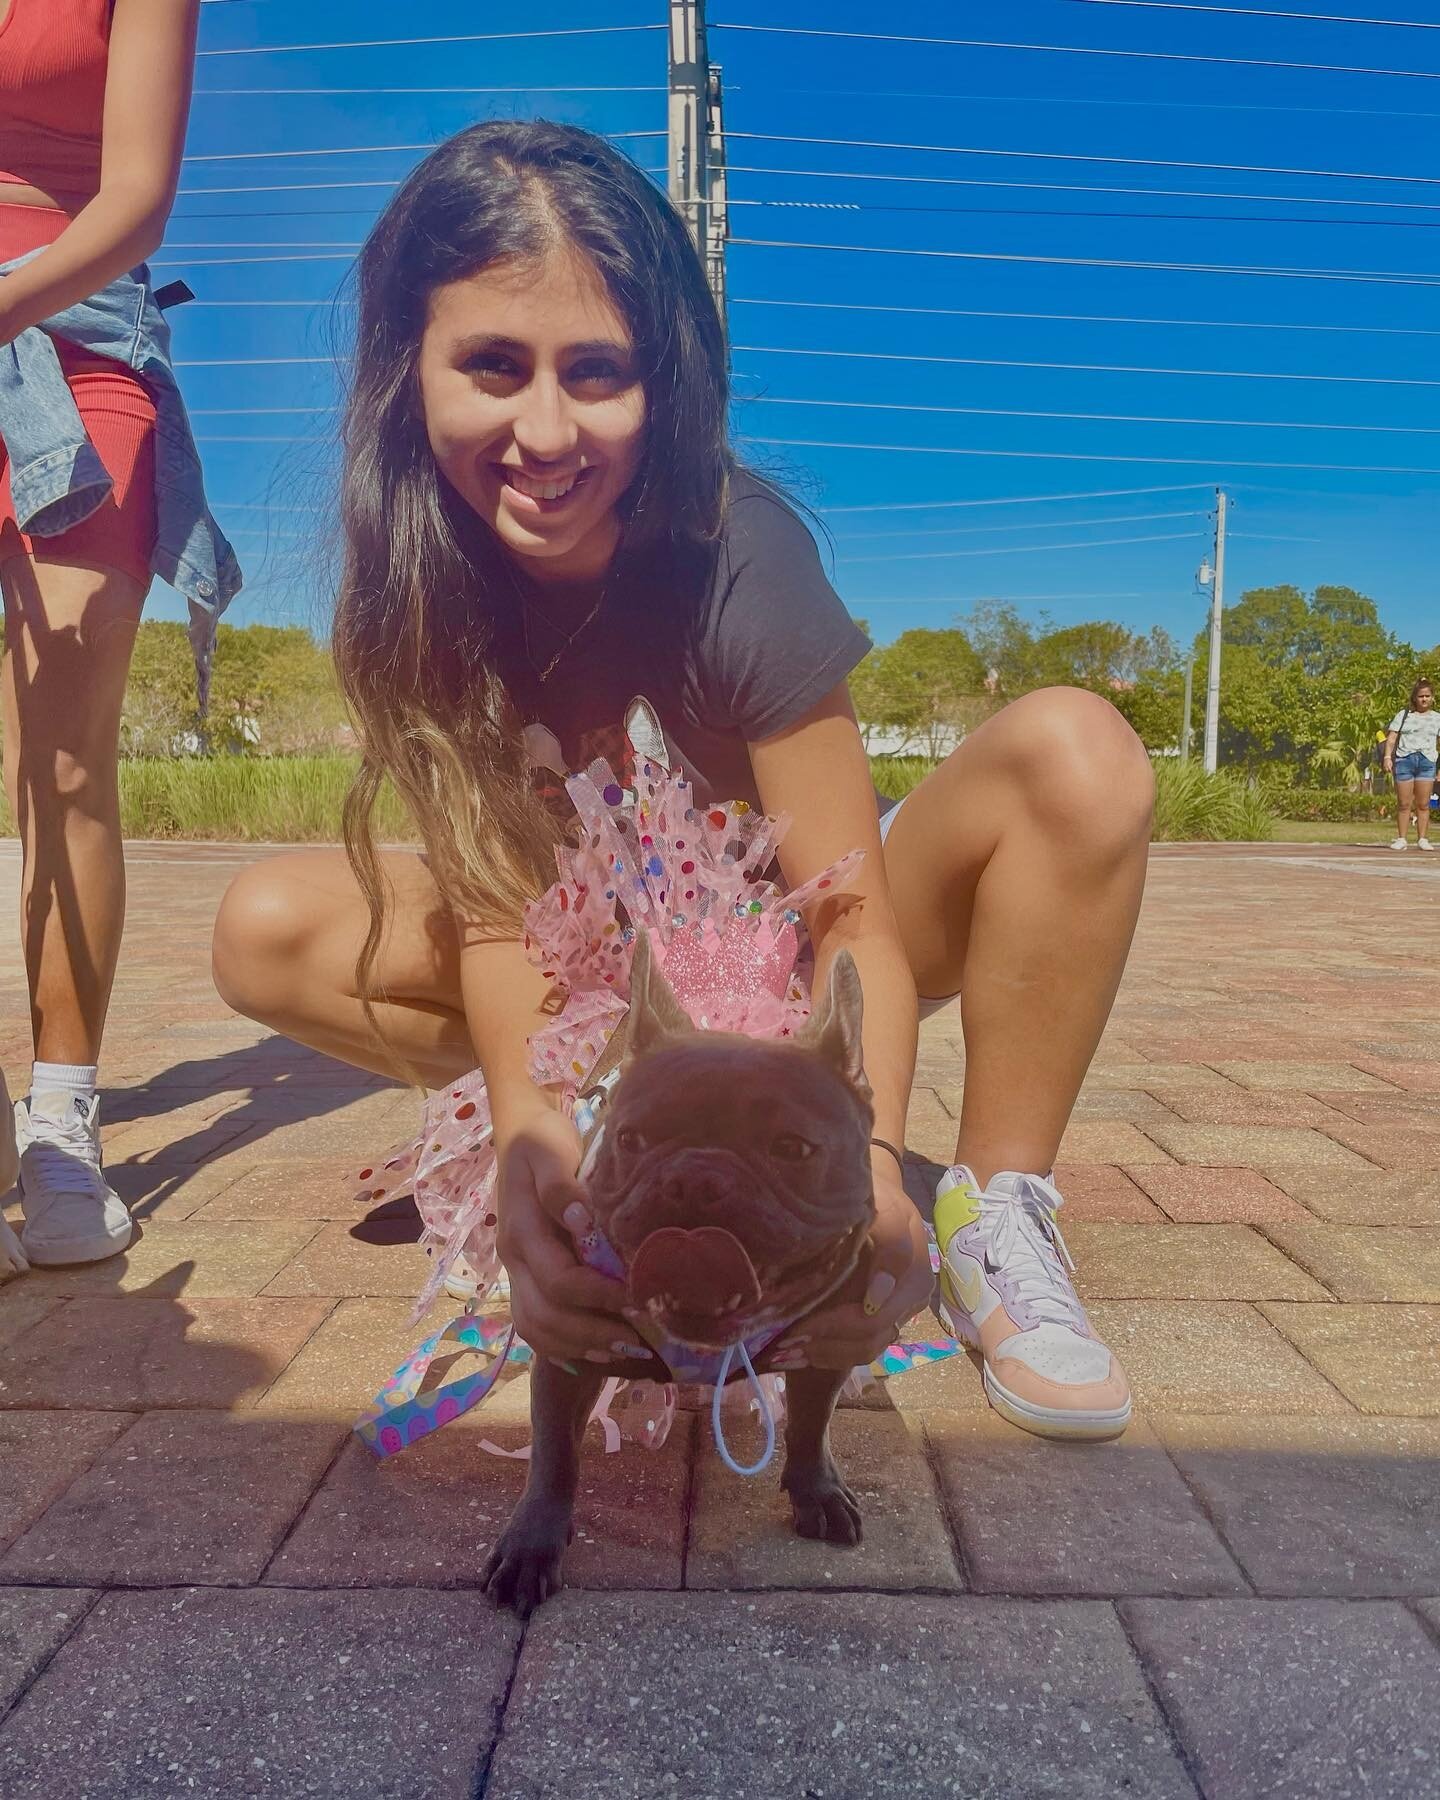 Happy Birthday BROOKLYN 💕It&rsquo;s always a PAWTY when you&rsquo;re  around 🎉 🎈🐾🐶🤪🎊☀️ &bull;
&bull;
&bull;
&bull;
&bull;
#pawfectpalsmiami #pawfectpals #miamidogwalkers #miamipetsitters
#pawfectwalkers #pawfectmiami 
#miamidogwalkers #miamipe